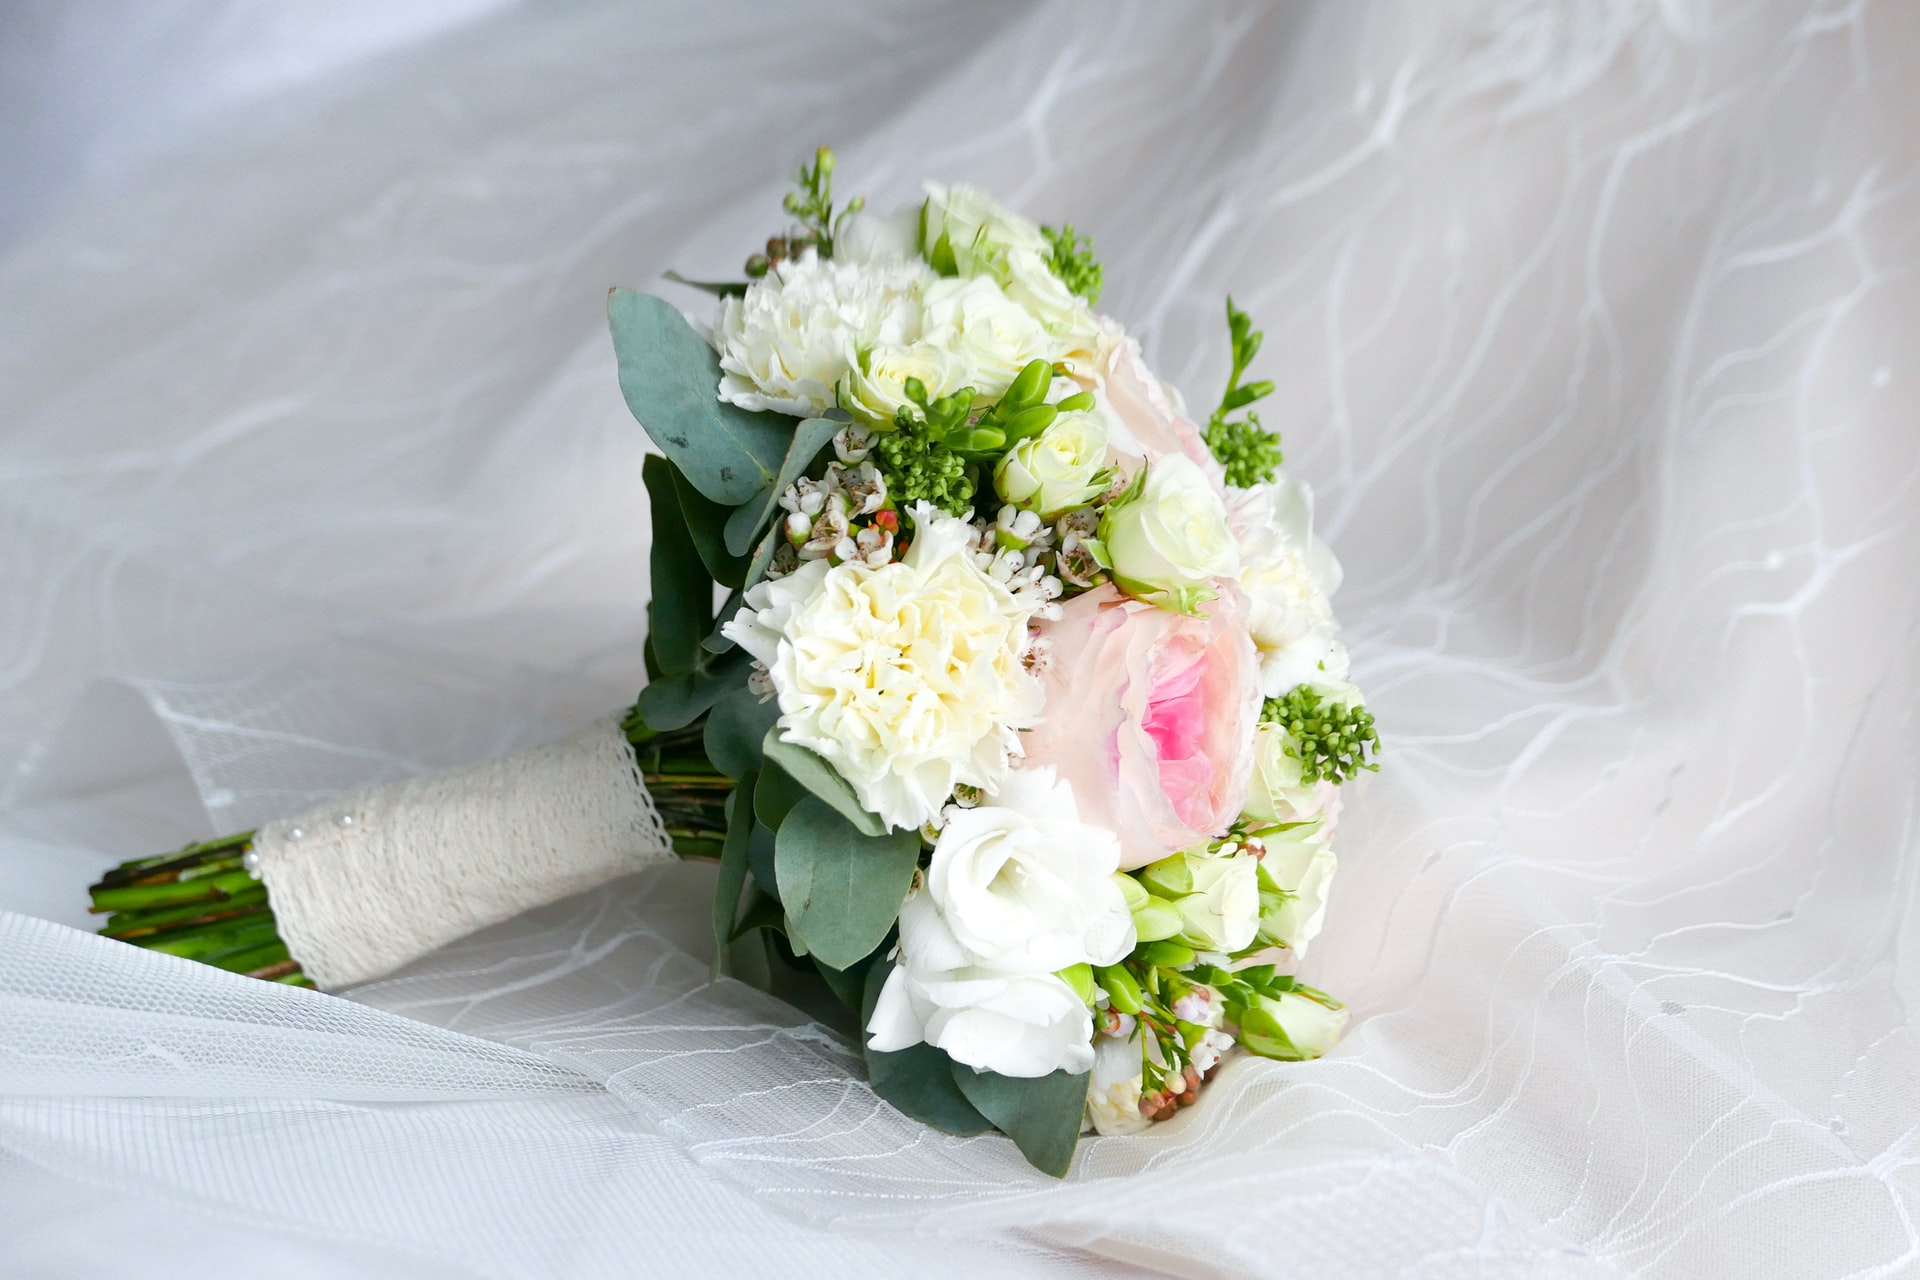 Closeup photo of white and pink petalled flower bouquet